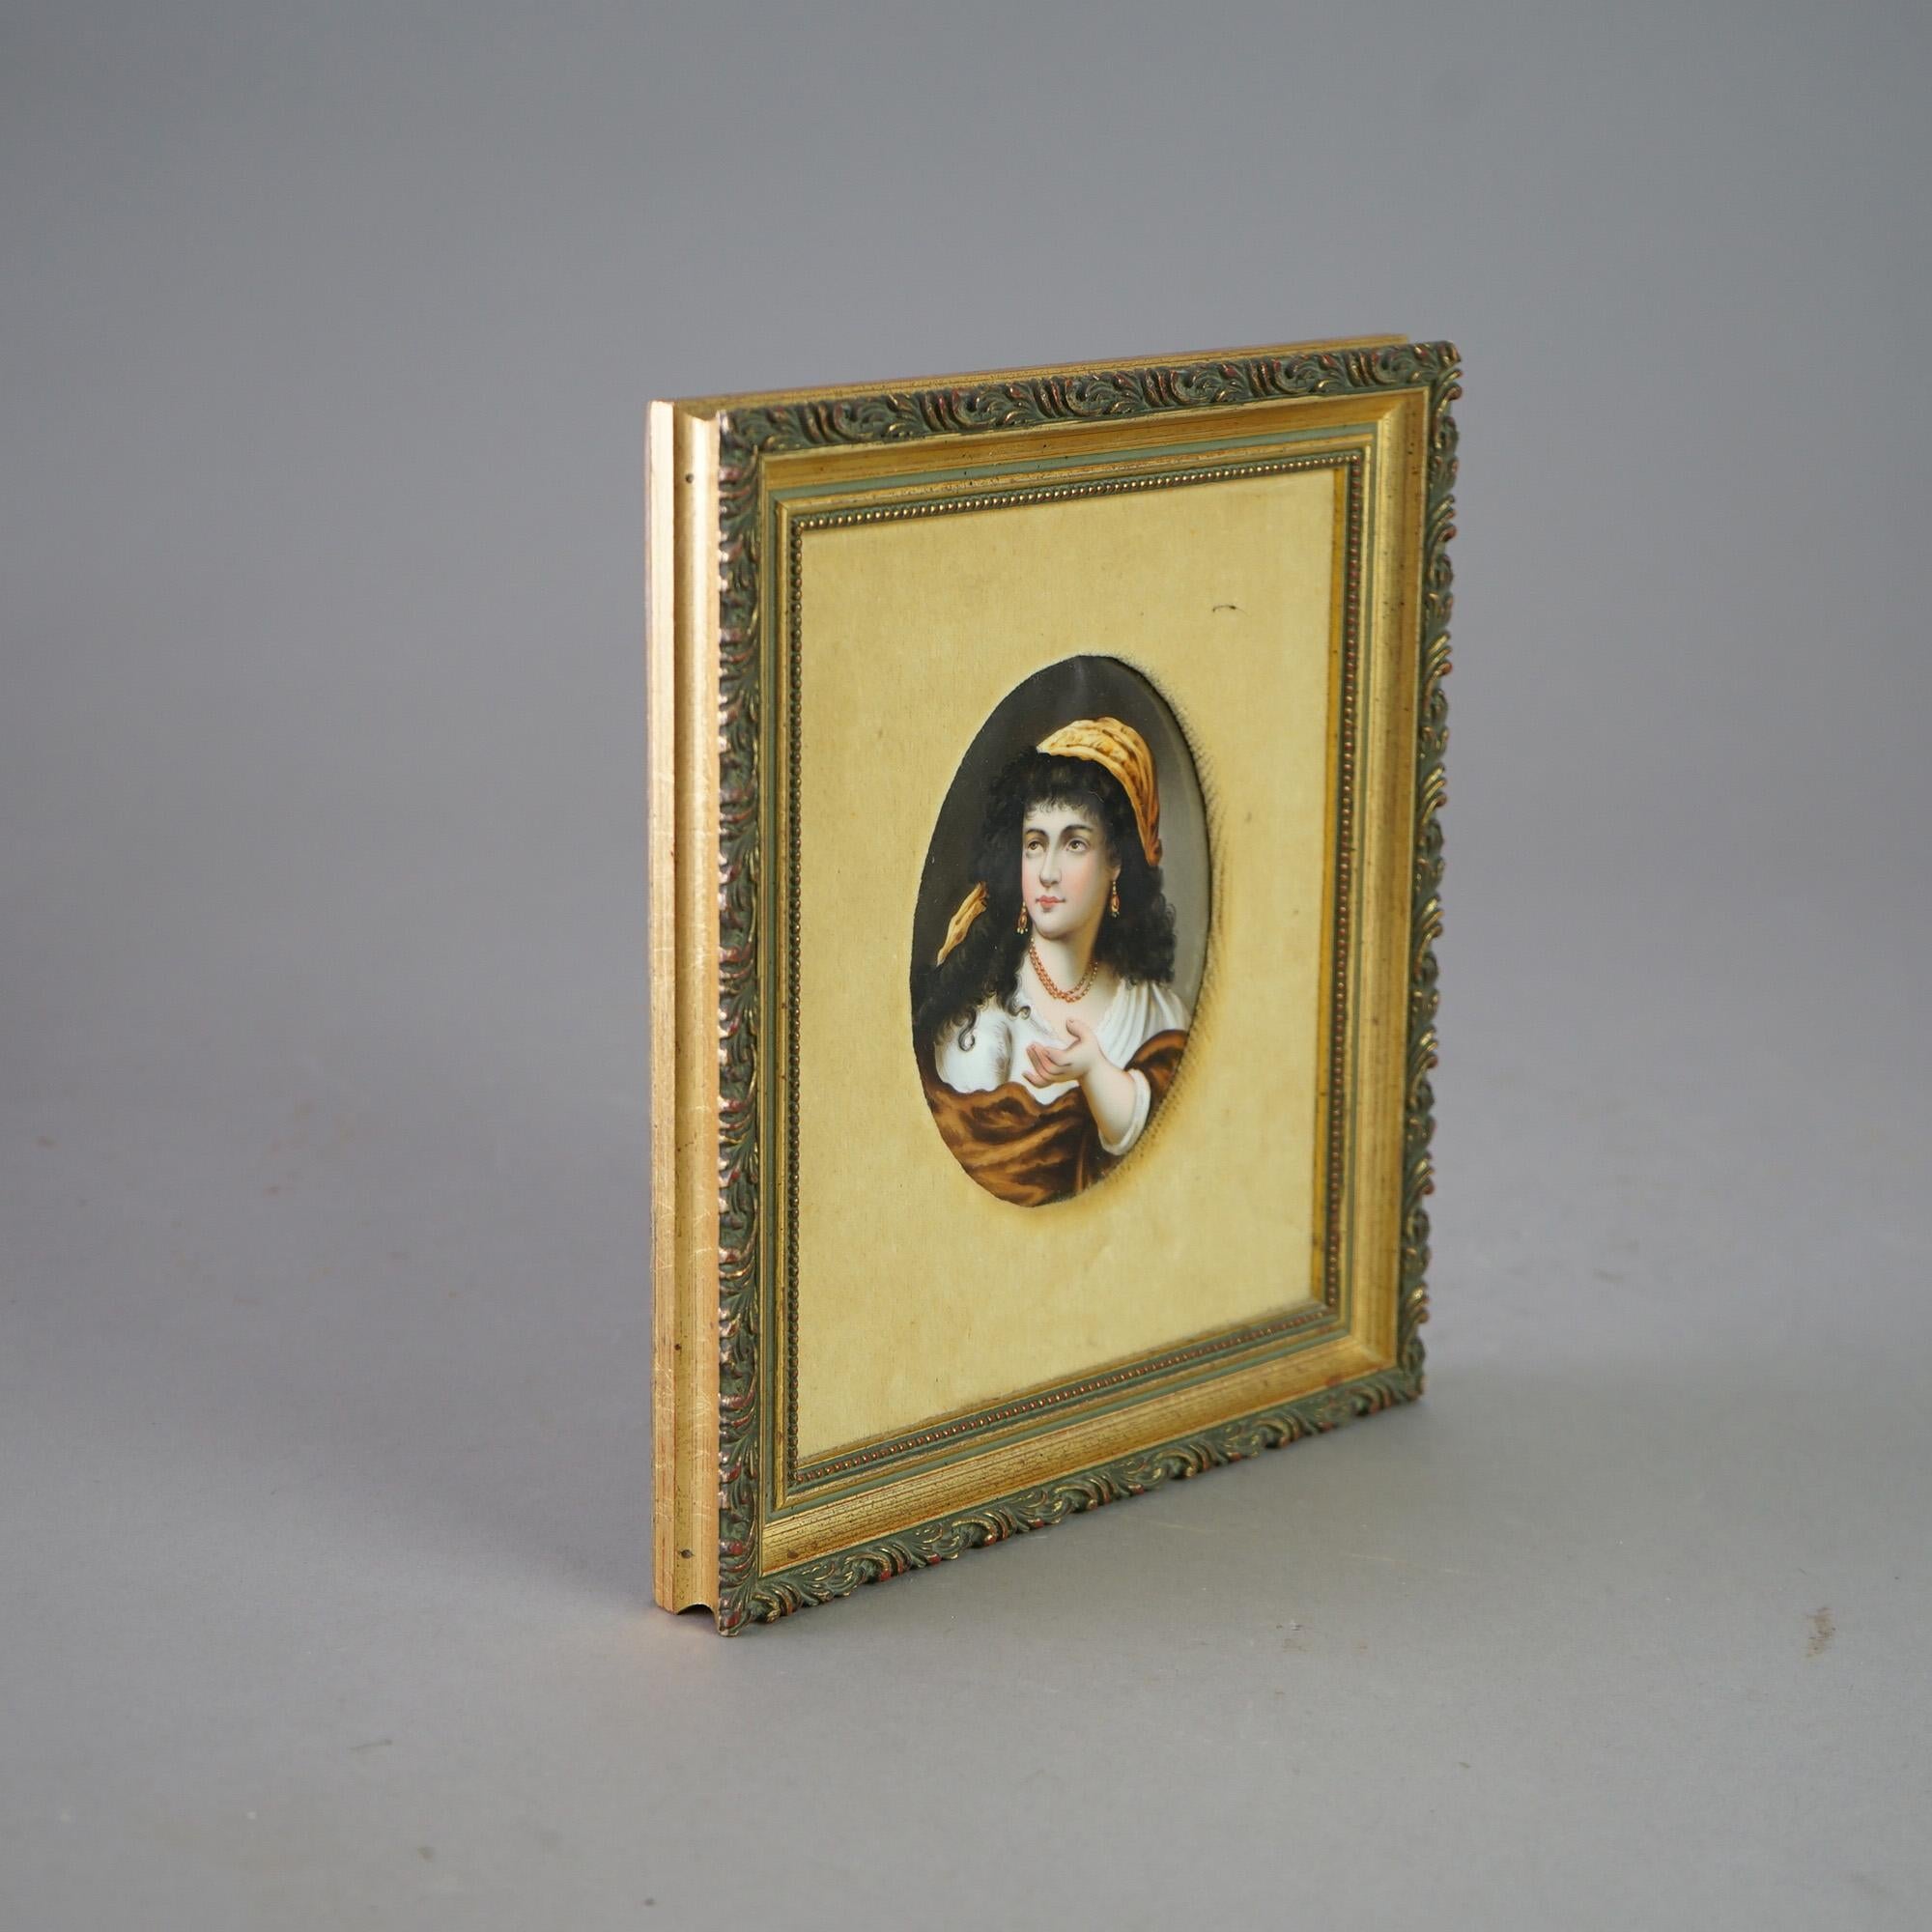 An antique portrait in the manner of KPM offers hand painted gypsy woman on porcelain plaque, seated in giltwood frame, signed, 19th century

Measures- 9.5''H x 8.25''W x 1.25''D